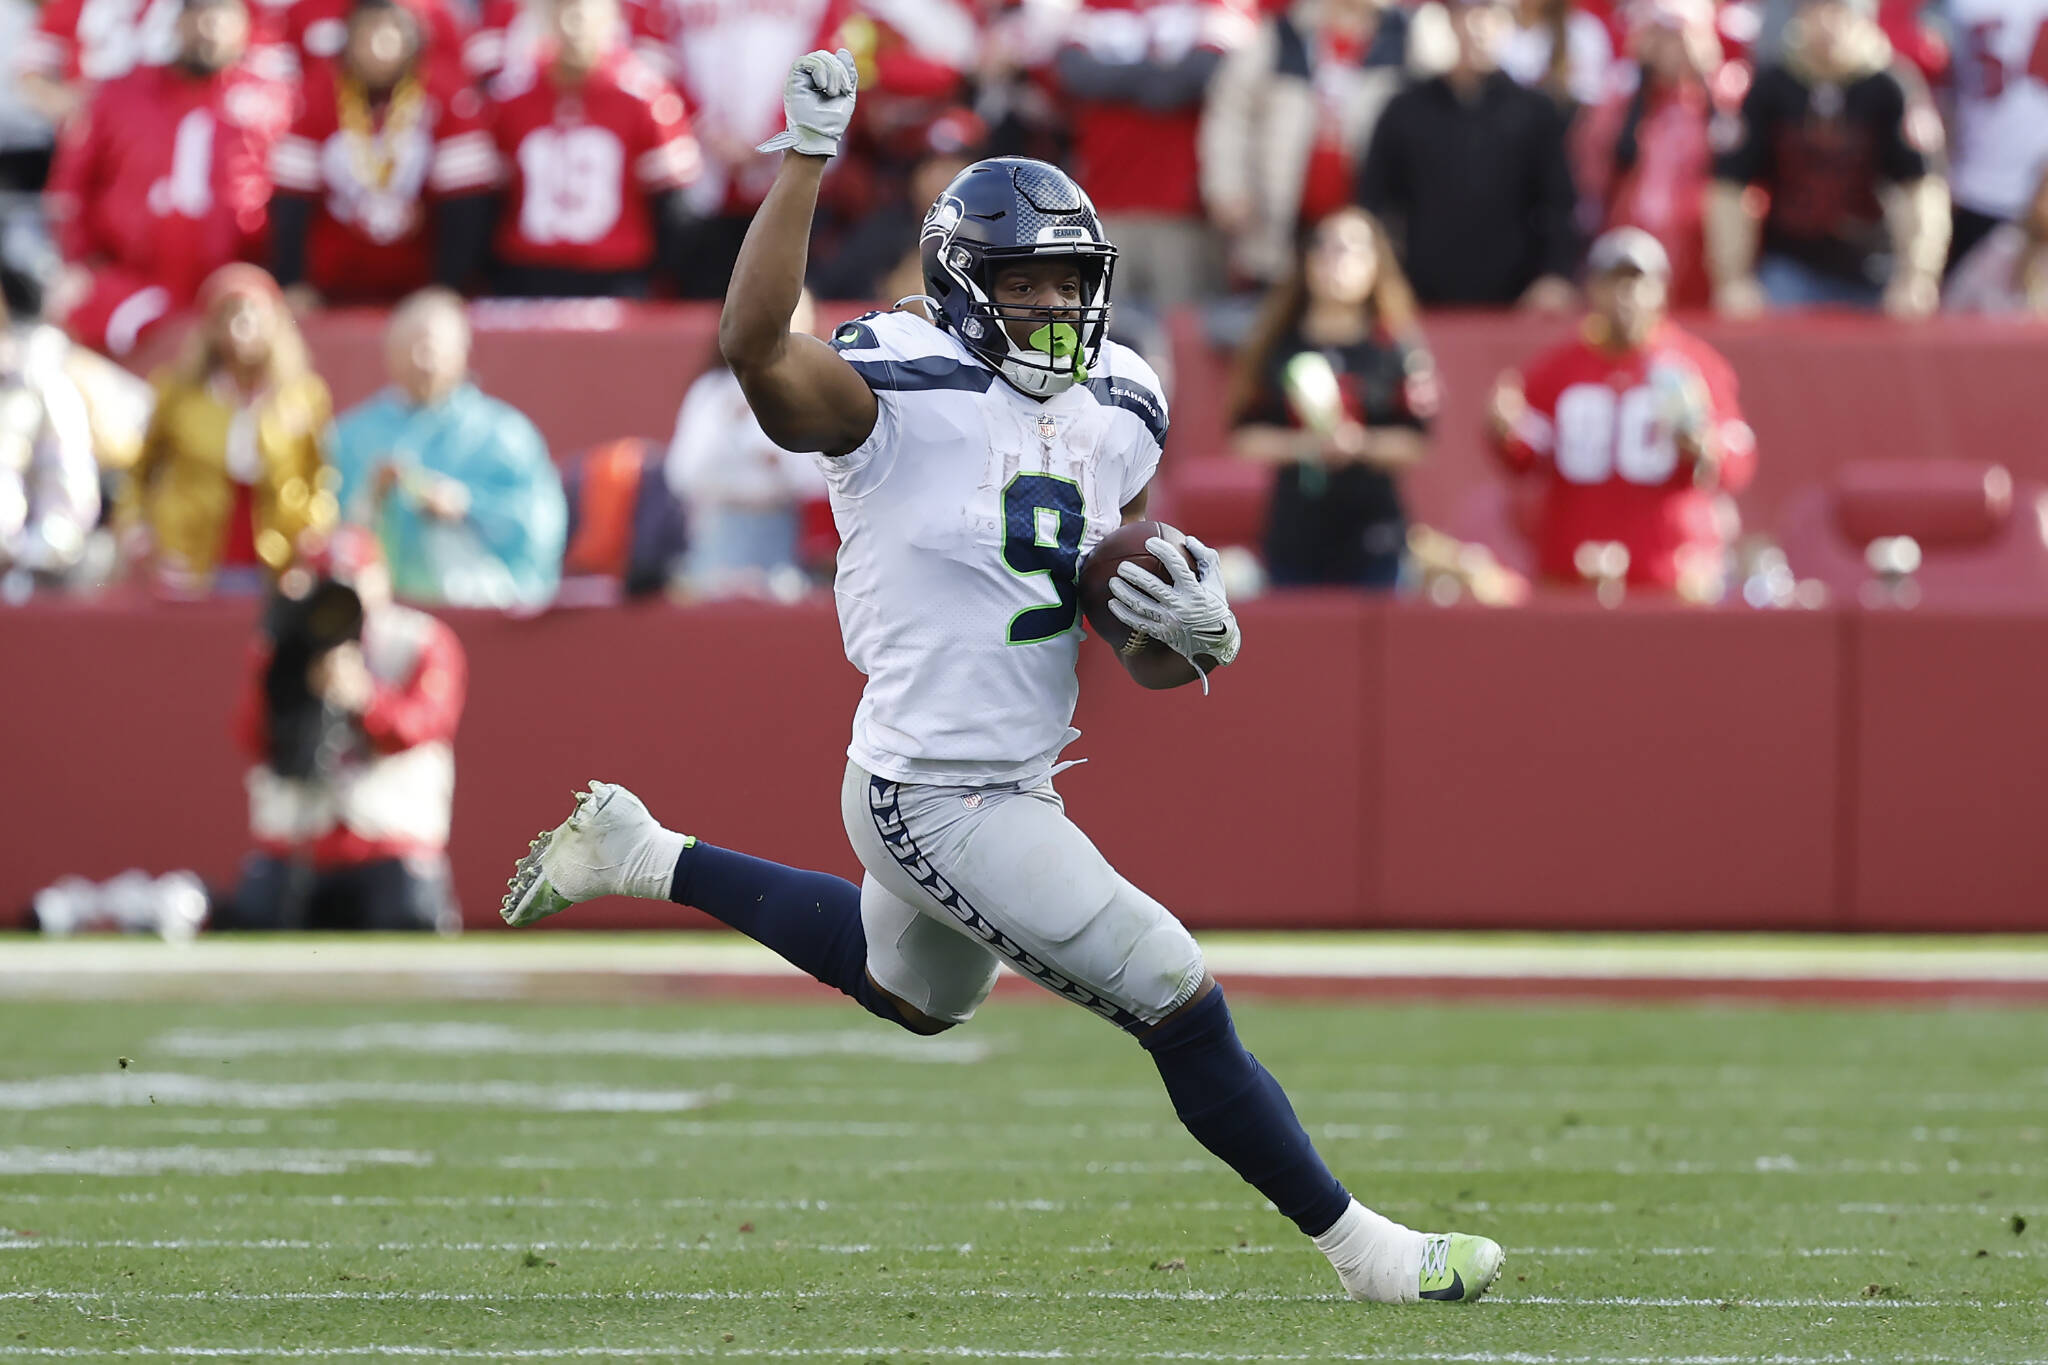 Seahawks running back Kenneth Walker III carries the ball during a playoff game against the 49ers on Jan. 14 in Santa Clara, Calif. (AP Photo/Josie Lepe)